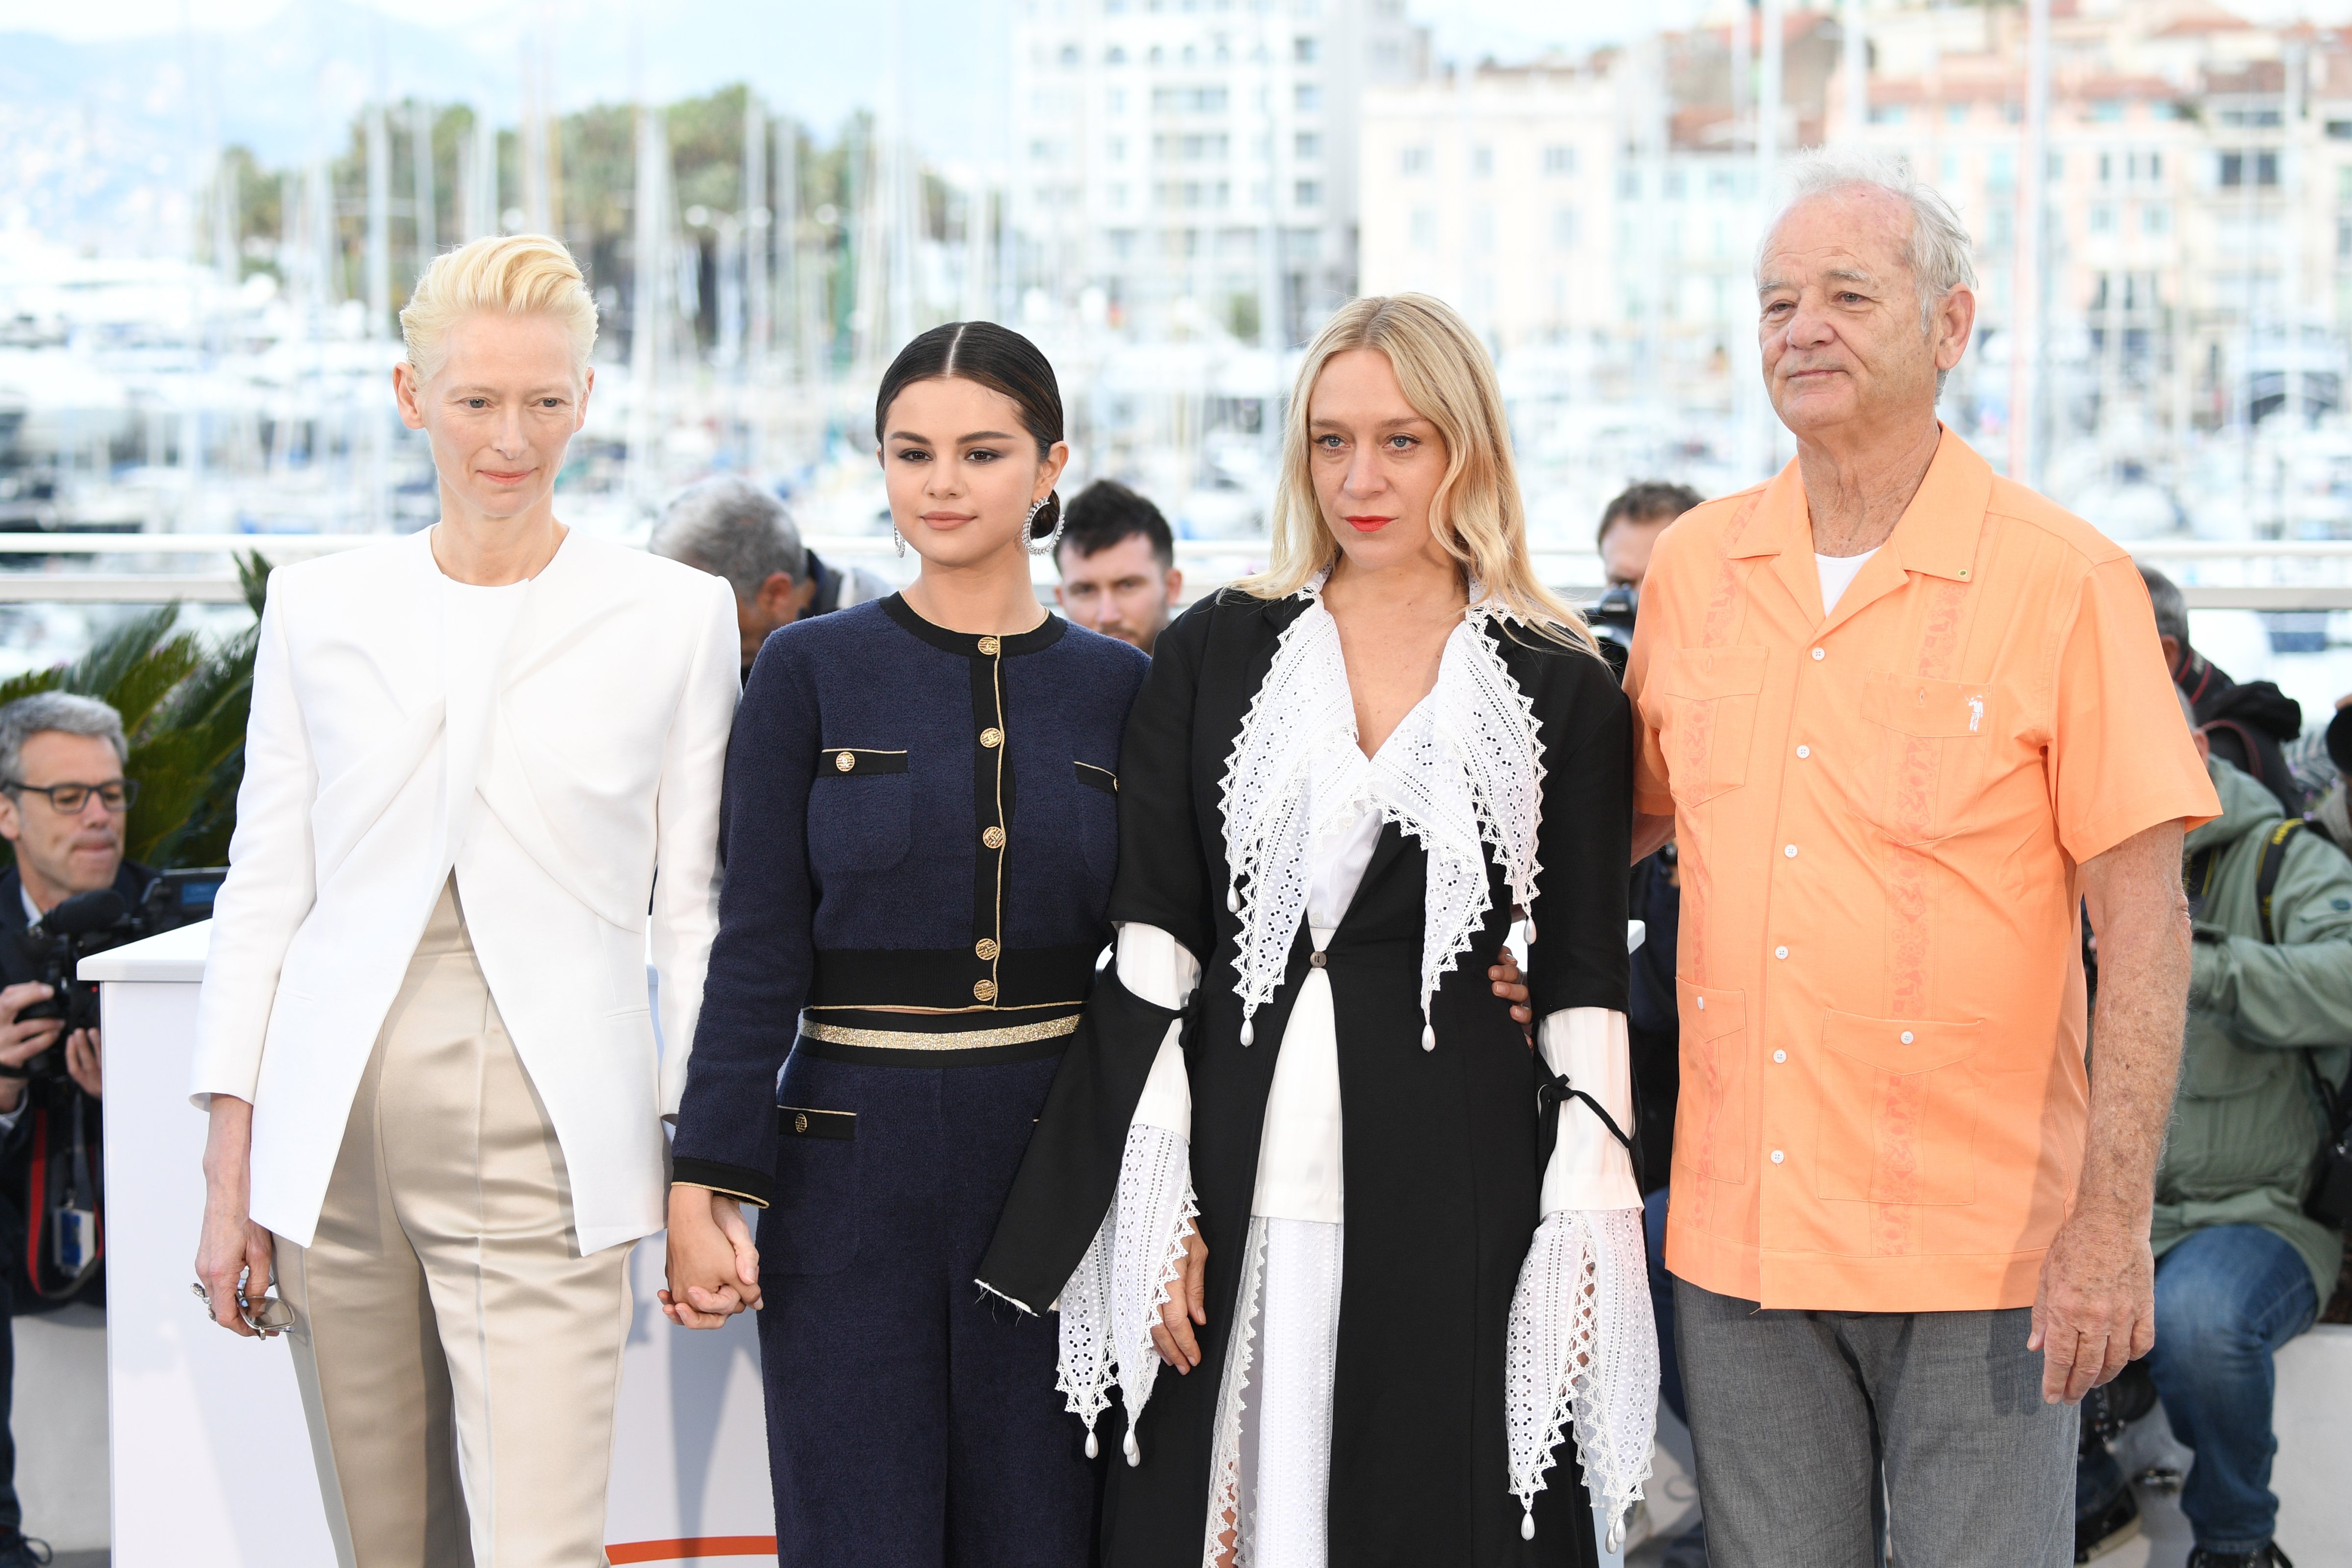 Tilda Swinton, Selena Gomez, Chloe Sevigny and Bill Murray at the 72nd annual Cannes Film Festival on May 15, 2019 in Cannes, France. (Daniele Venturelli&mdash;WireImage)